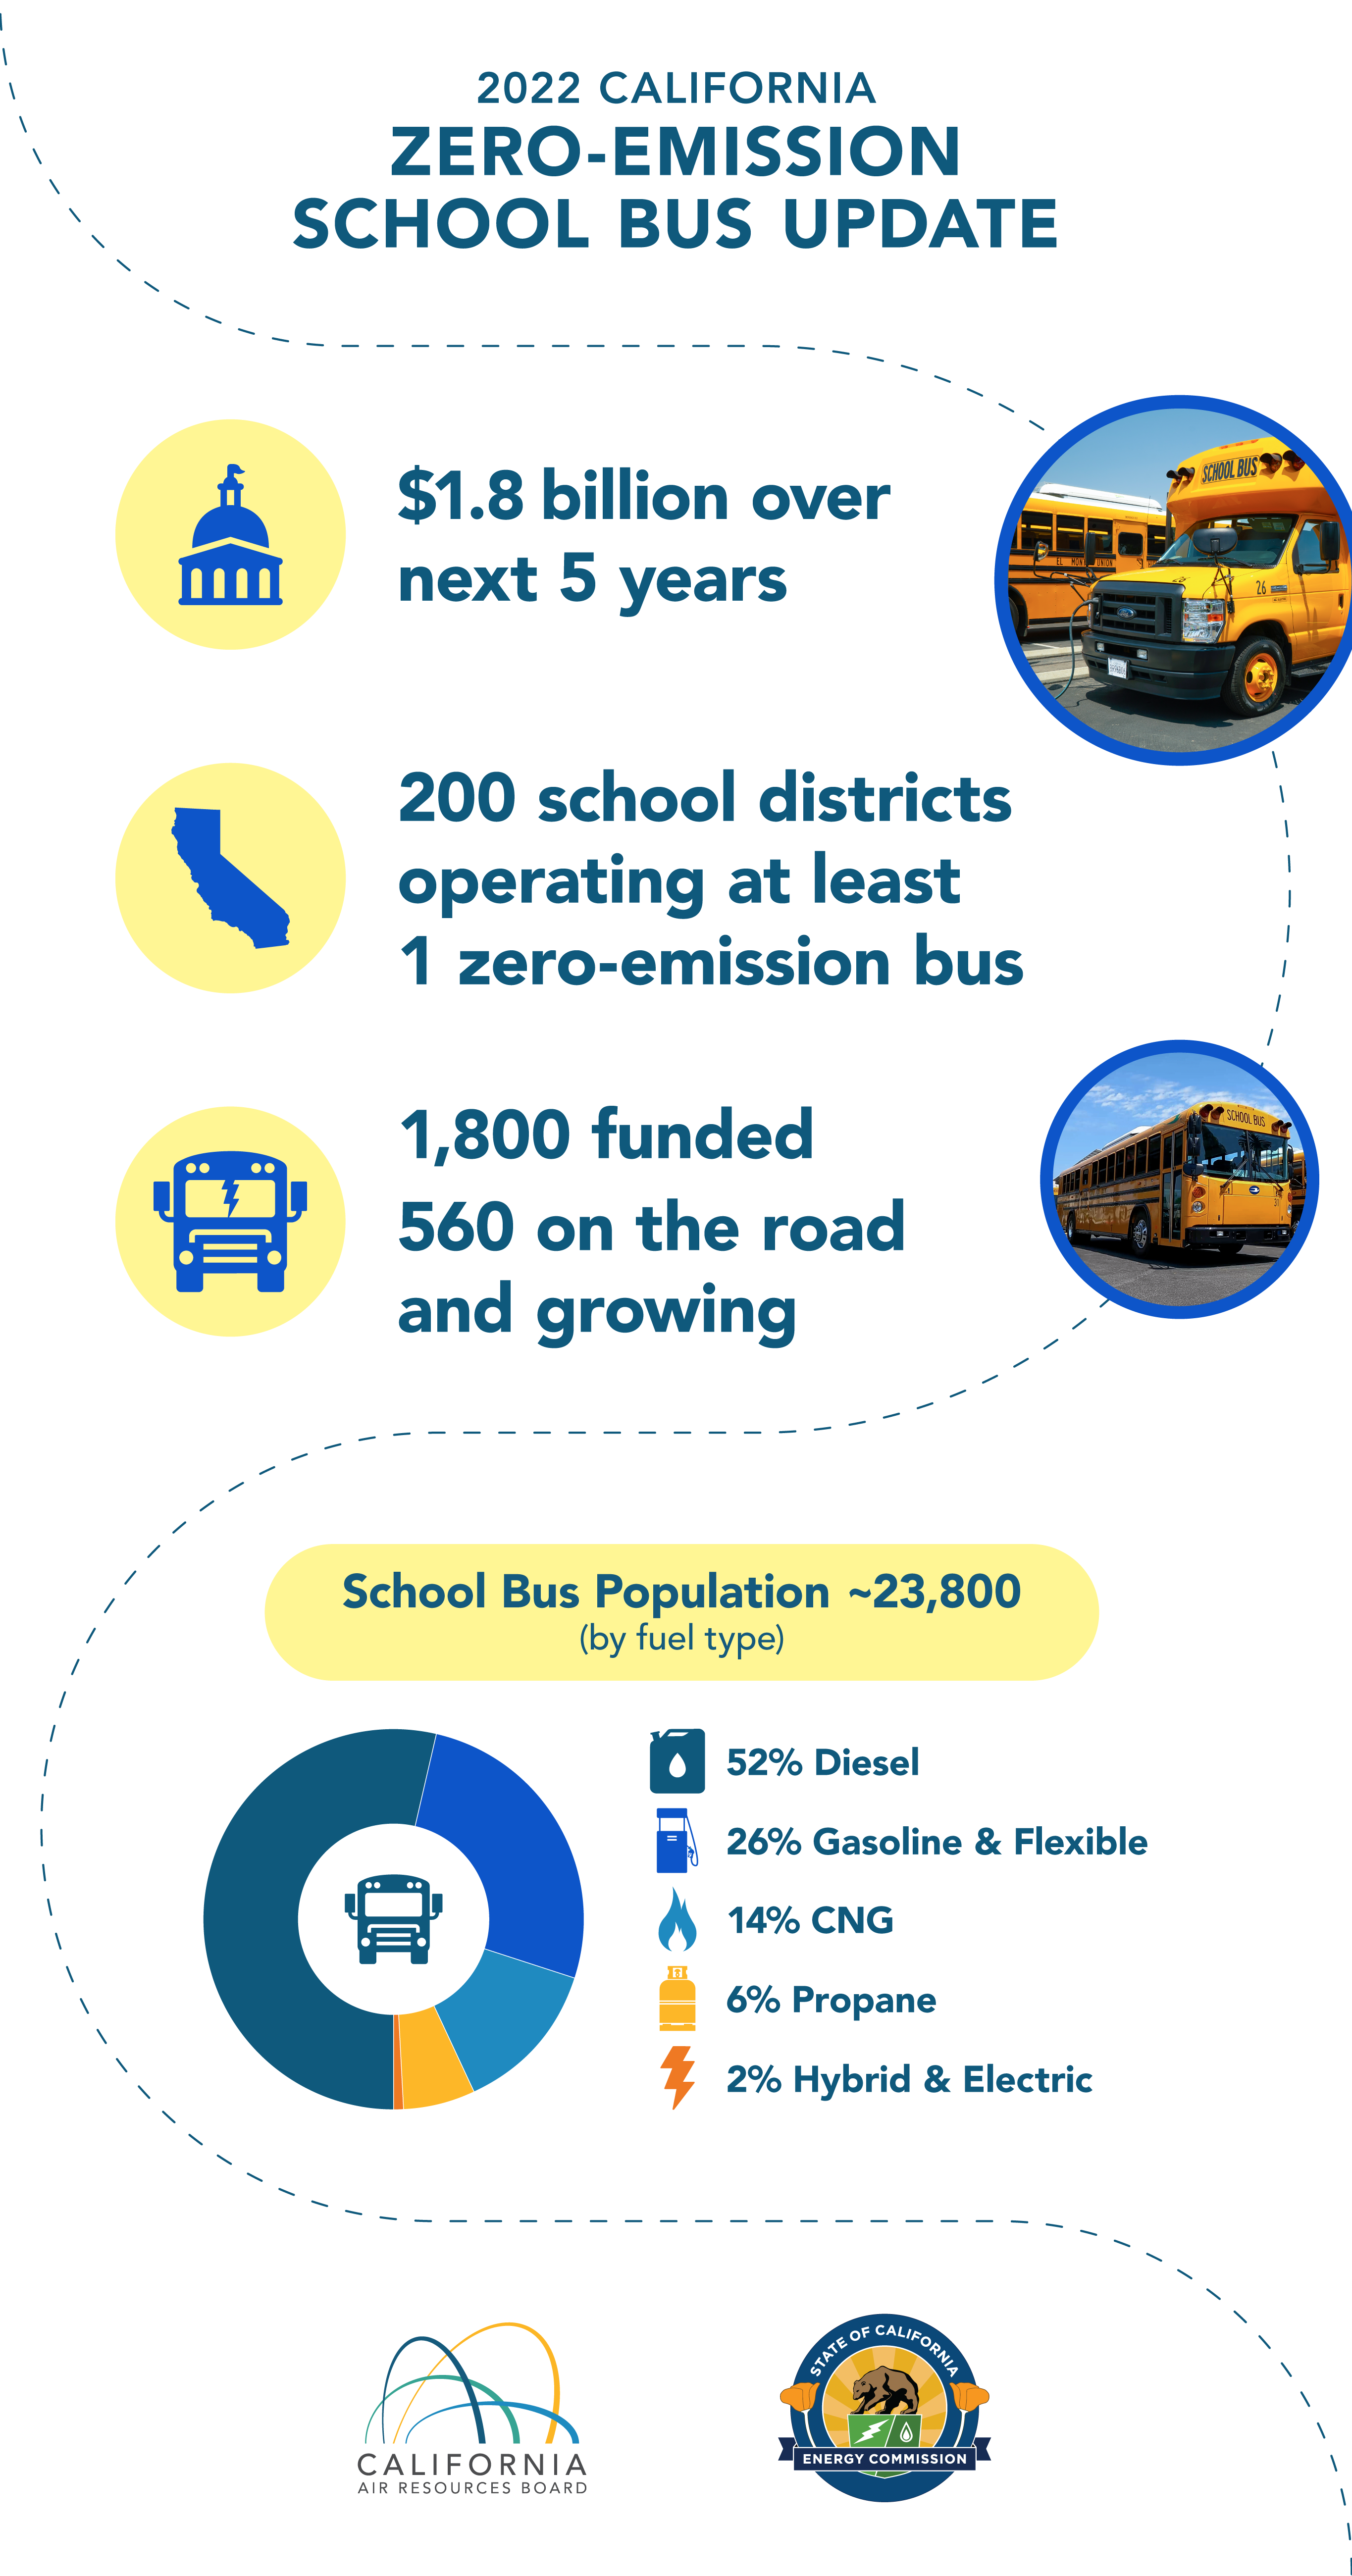 2022 California Zero-Emission School Bus Update. $1.8 billion over next 5 years. 200 school districts operating at least1 zero-emission bus. 1,800 funded 560 on the road and growing. School Bus Population ~23,800. CARB logo & CEC logo